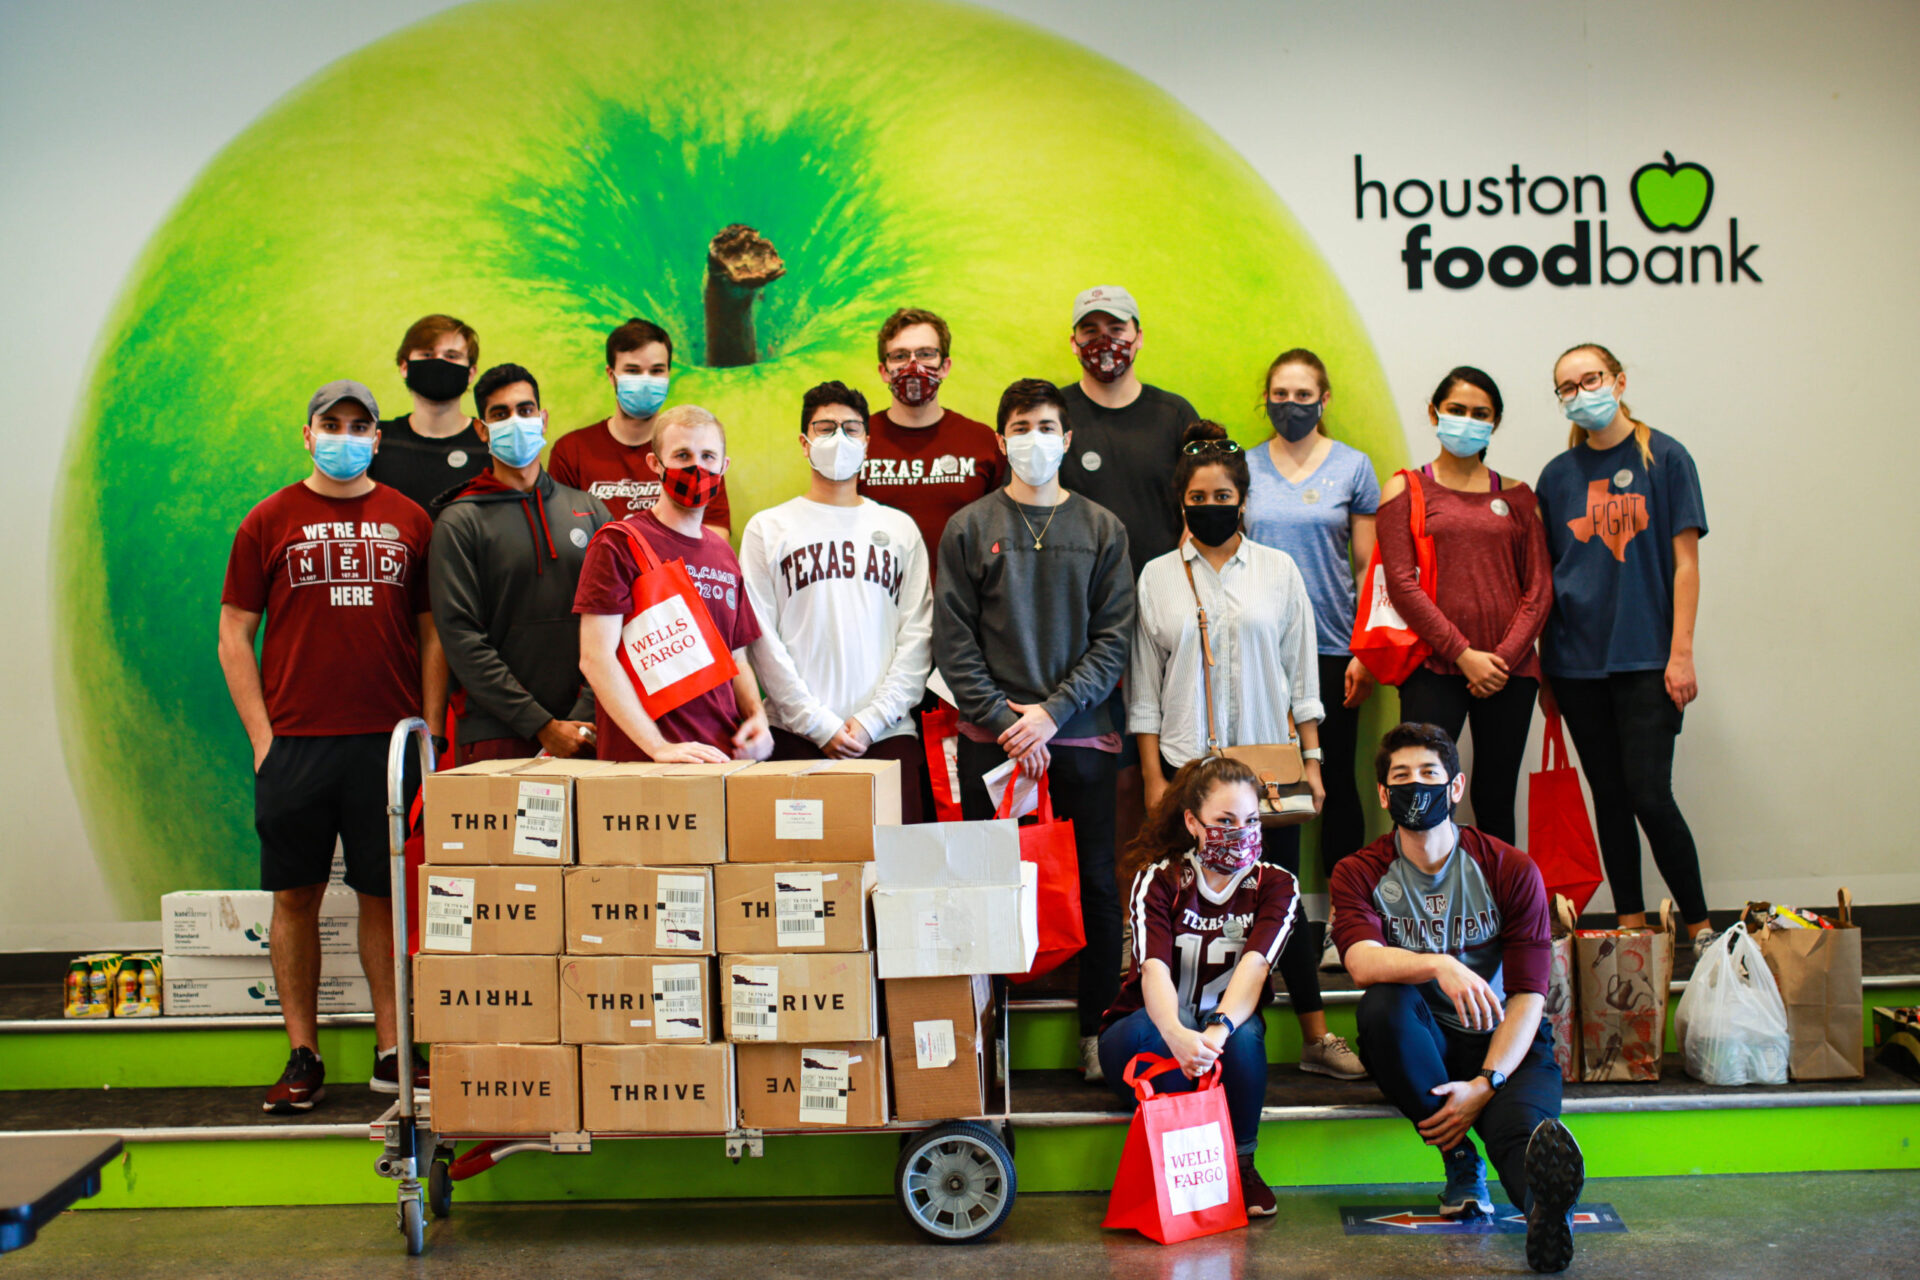 Zhi took this photo of her classmates at a volunteer event at the Houston Food Bank.